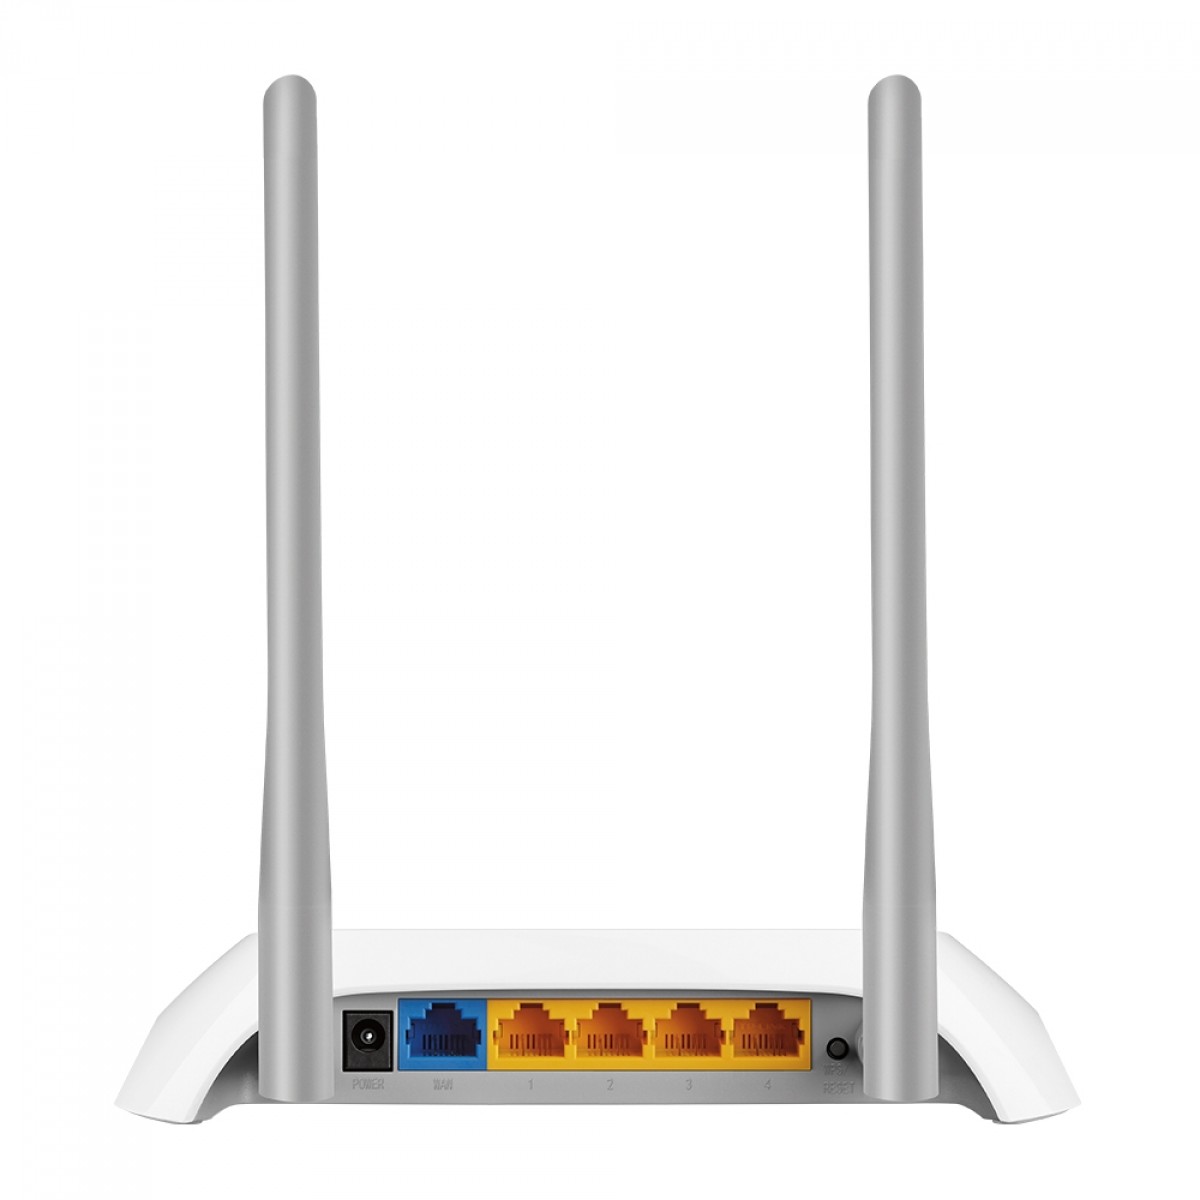 Roteador Wireless N TP-LINK, 300Mbps, TL-WR840N W